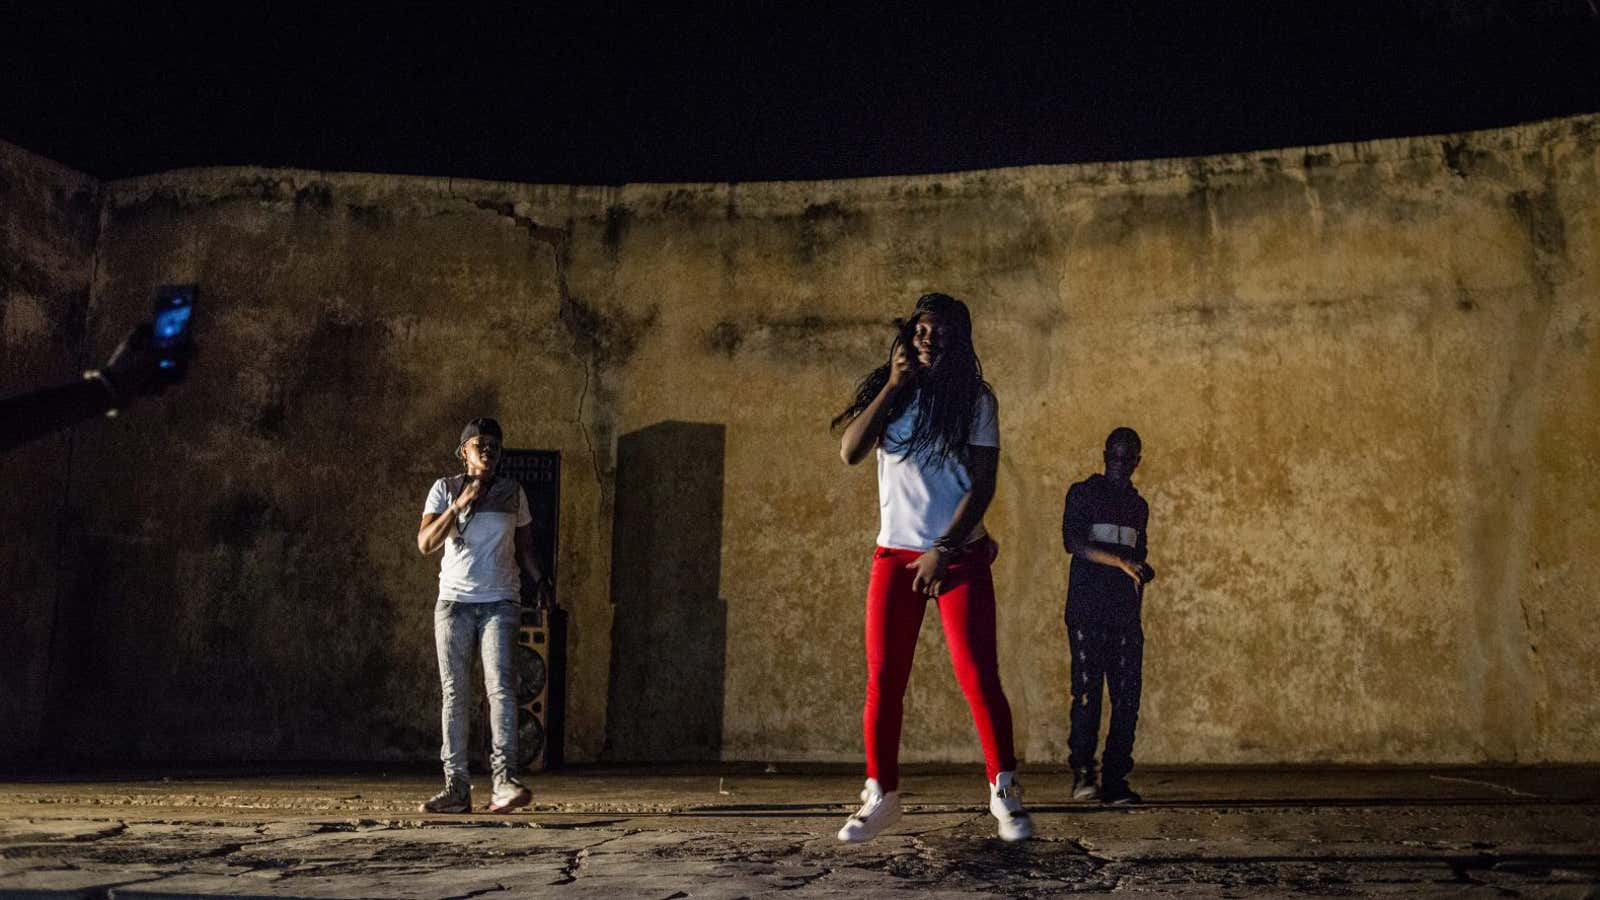 Little Ami (center) takes the stage with Ami (left) during one of her last songs of the evening on May 20, 2017 in Macina, Mali.